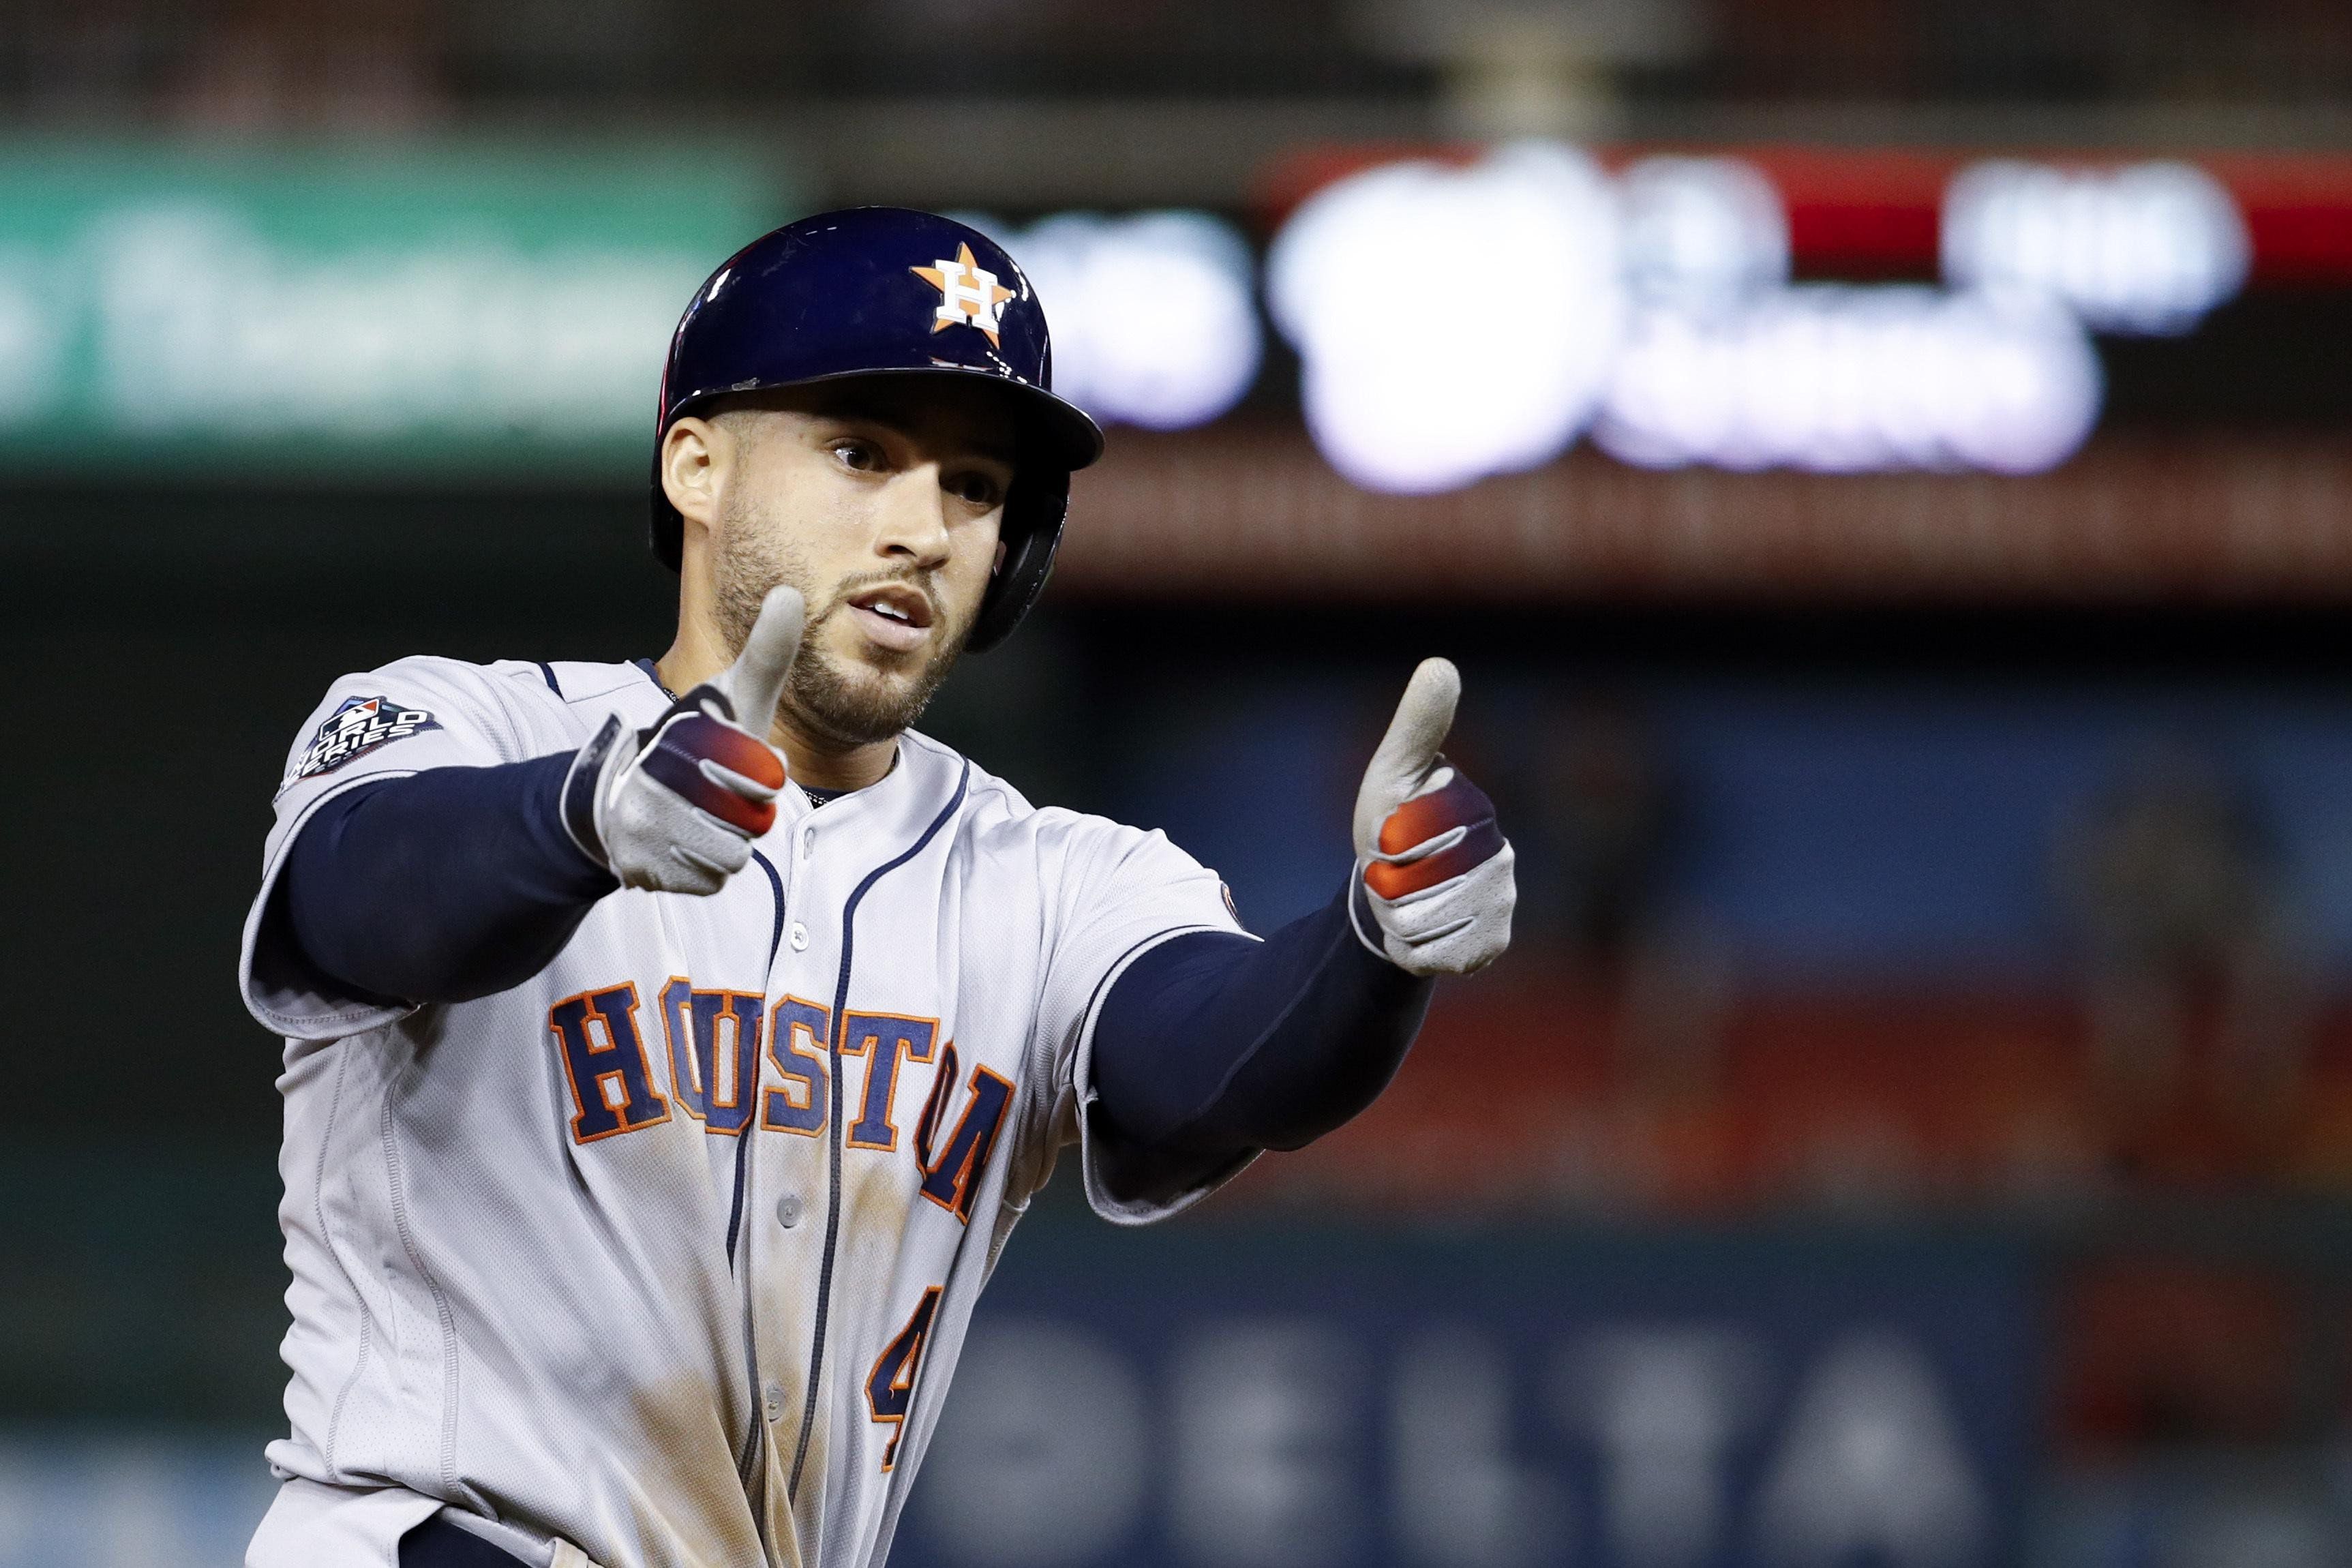 George Springer to Blue Jays, Michael Brantley staying with Astros